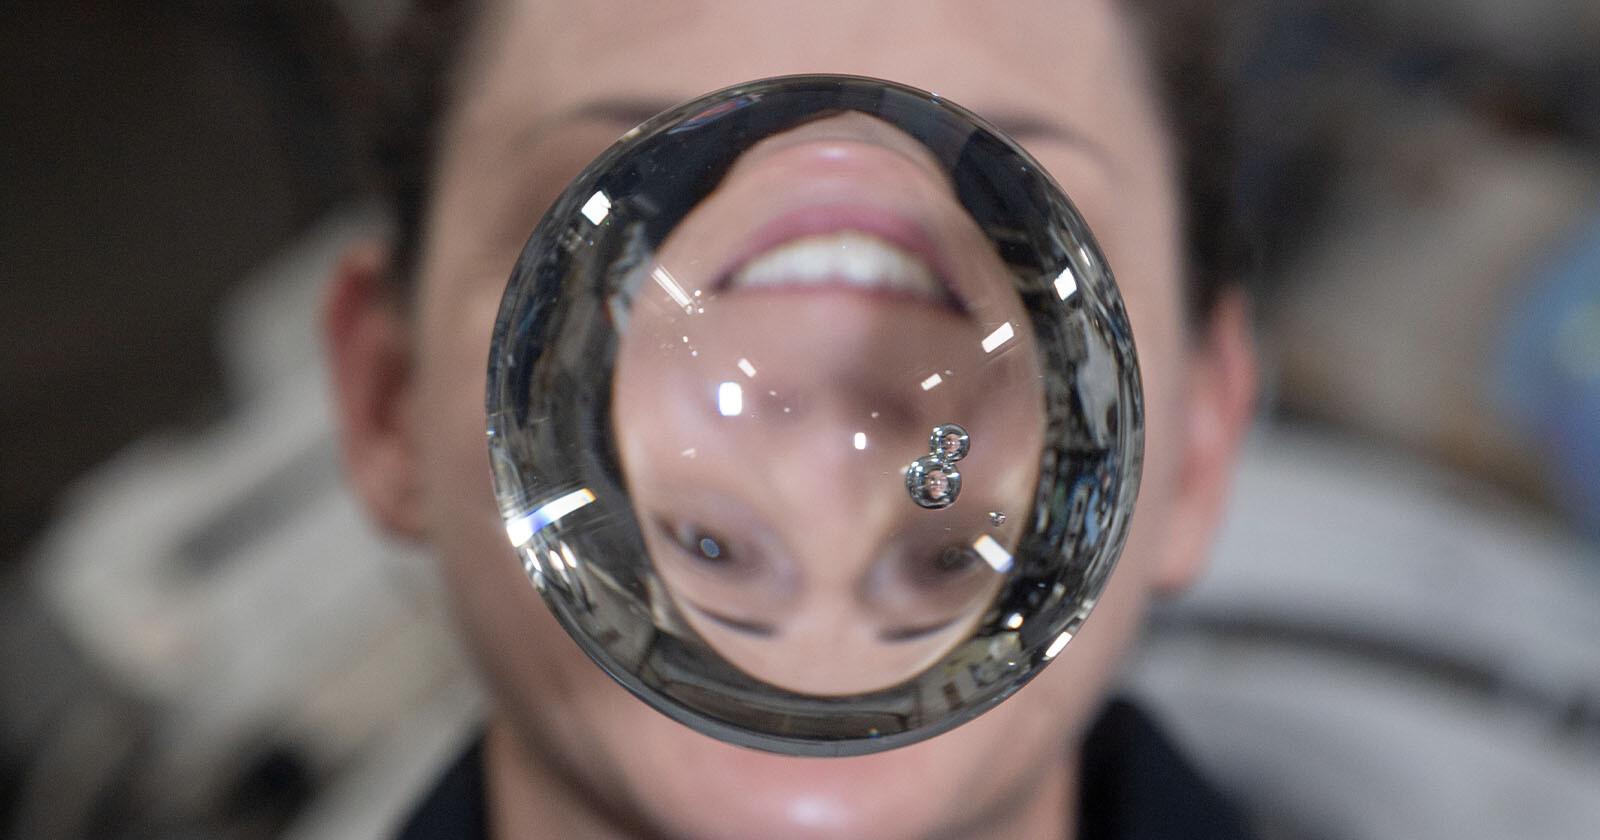  astronaut image refracted through weightless water bubble space 